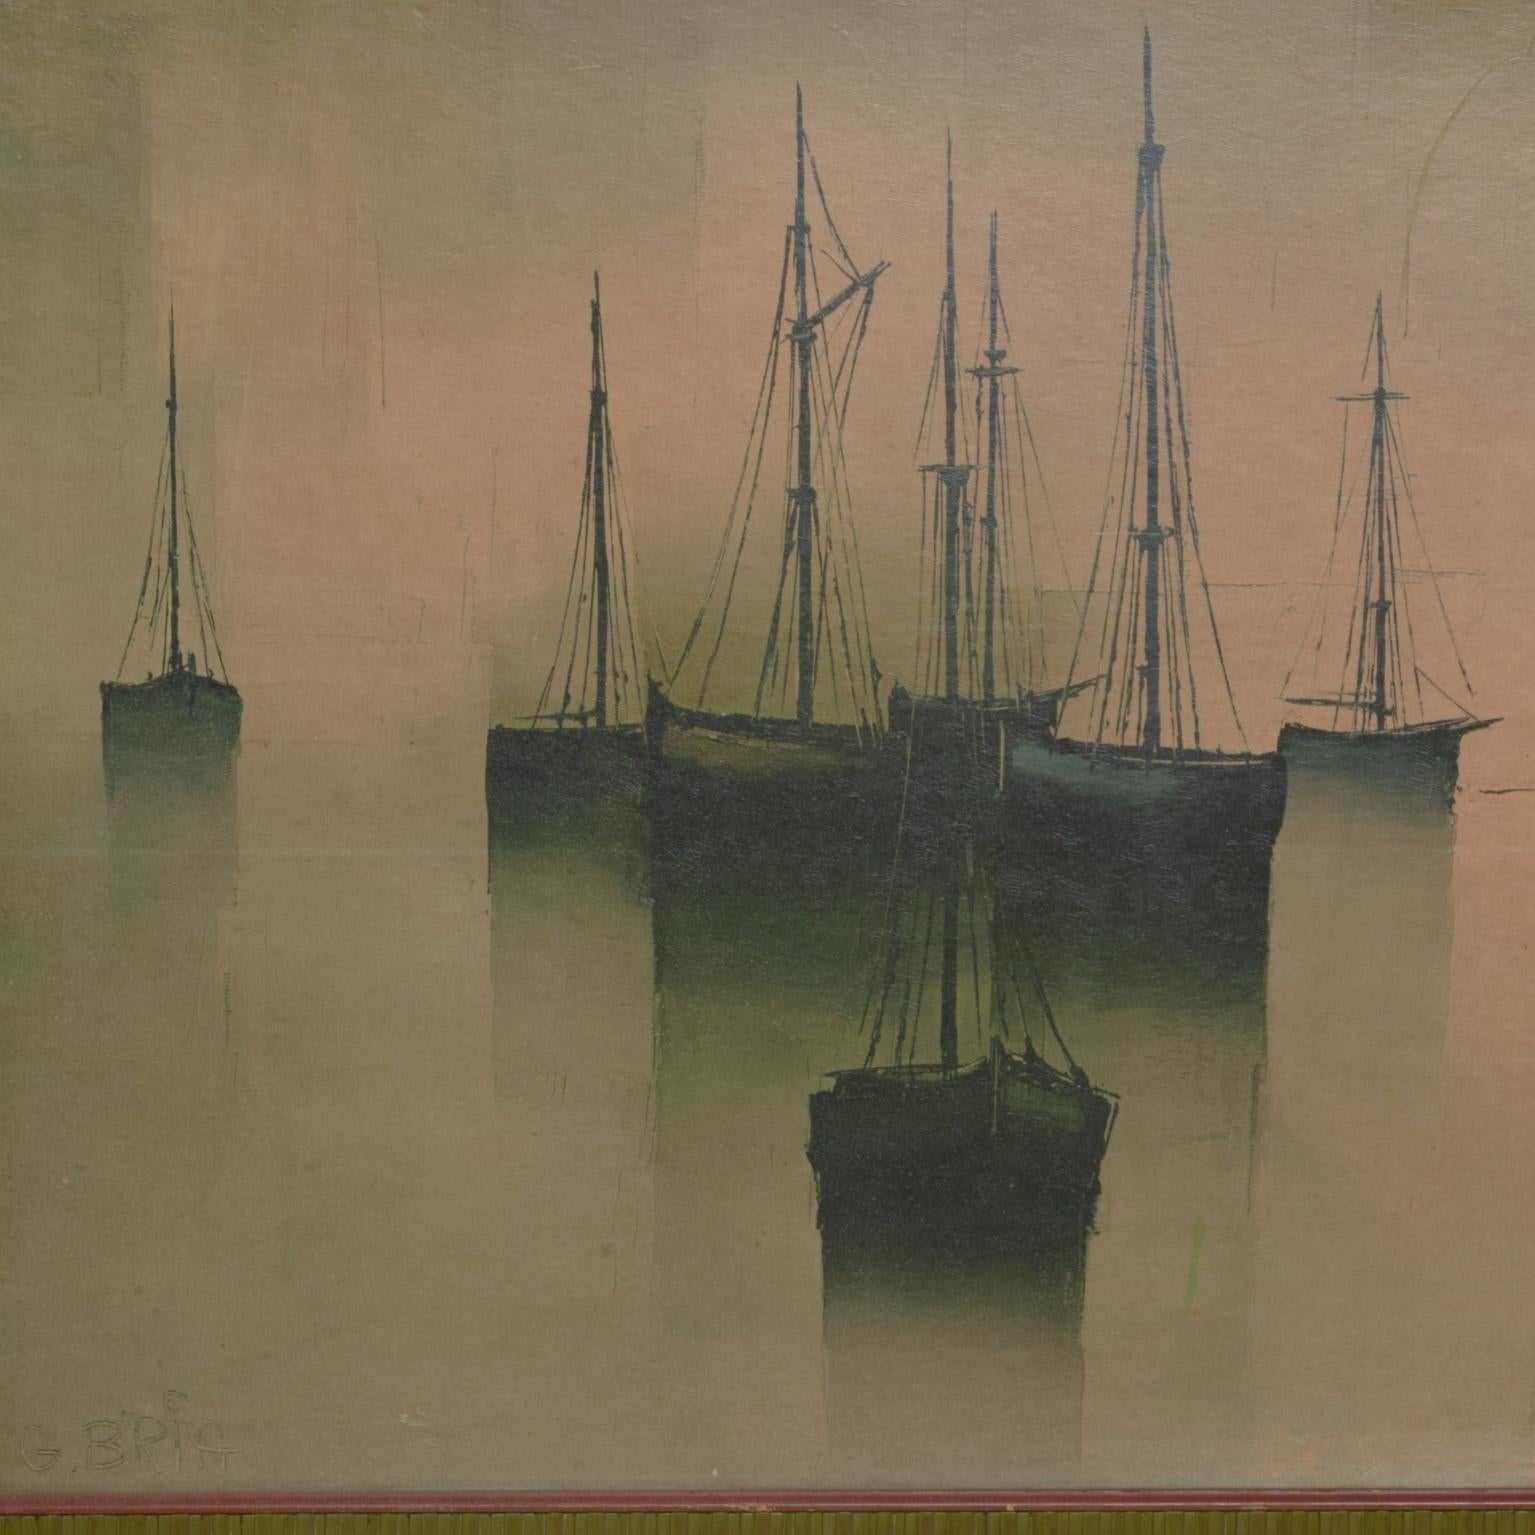 AMBIANIC offering
GILBERT BRIA (France b 1933), Sail Boats, Oil on Canvas
Dimensions: 43